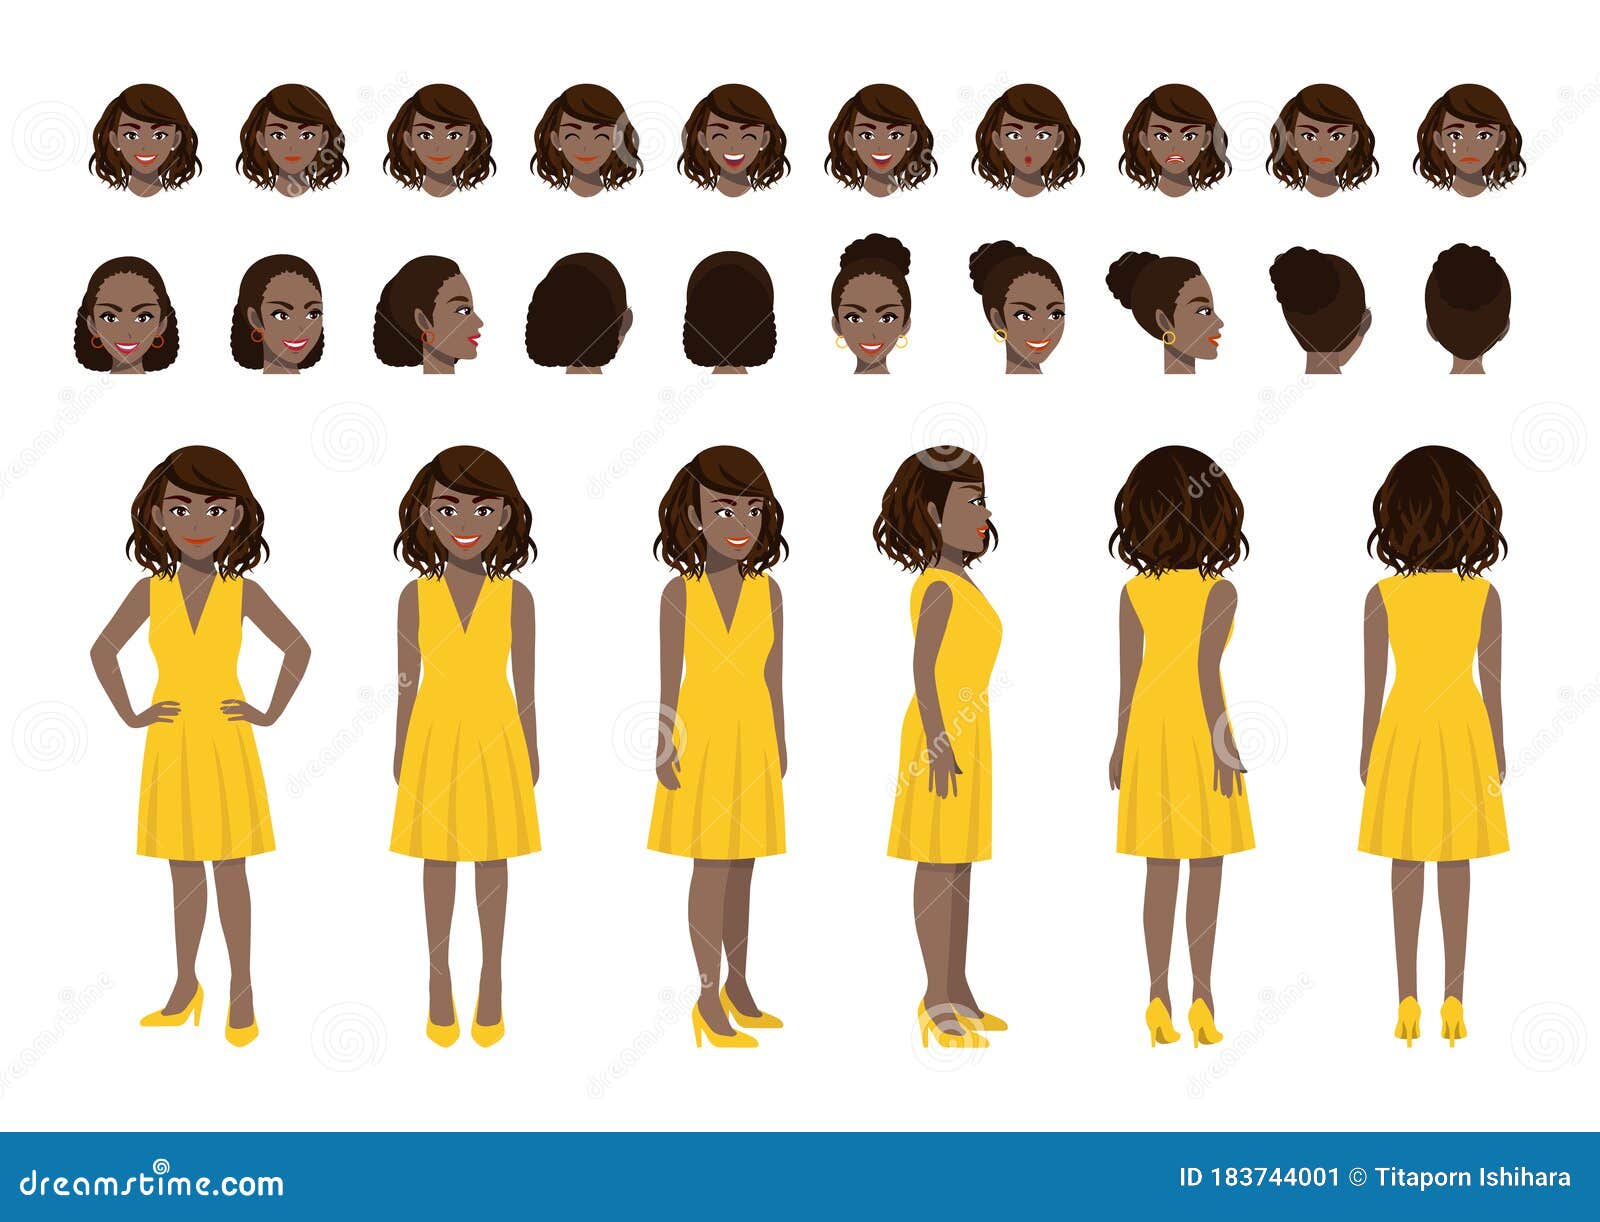 Share 145+ hairstyles for flat head latest